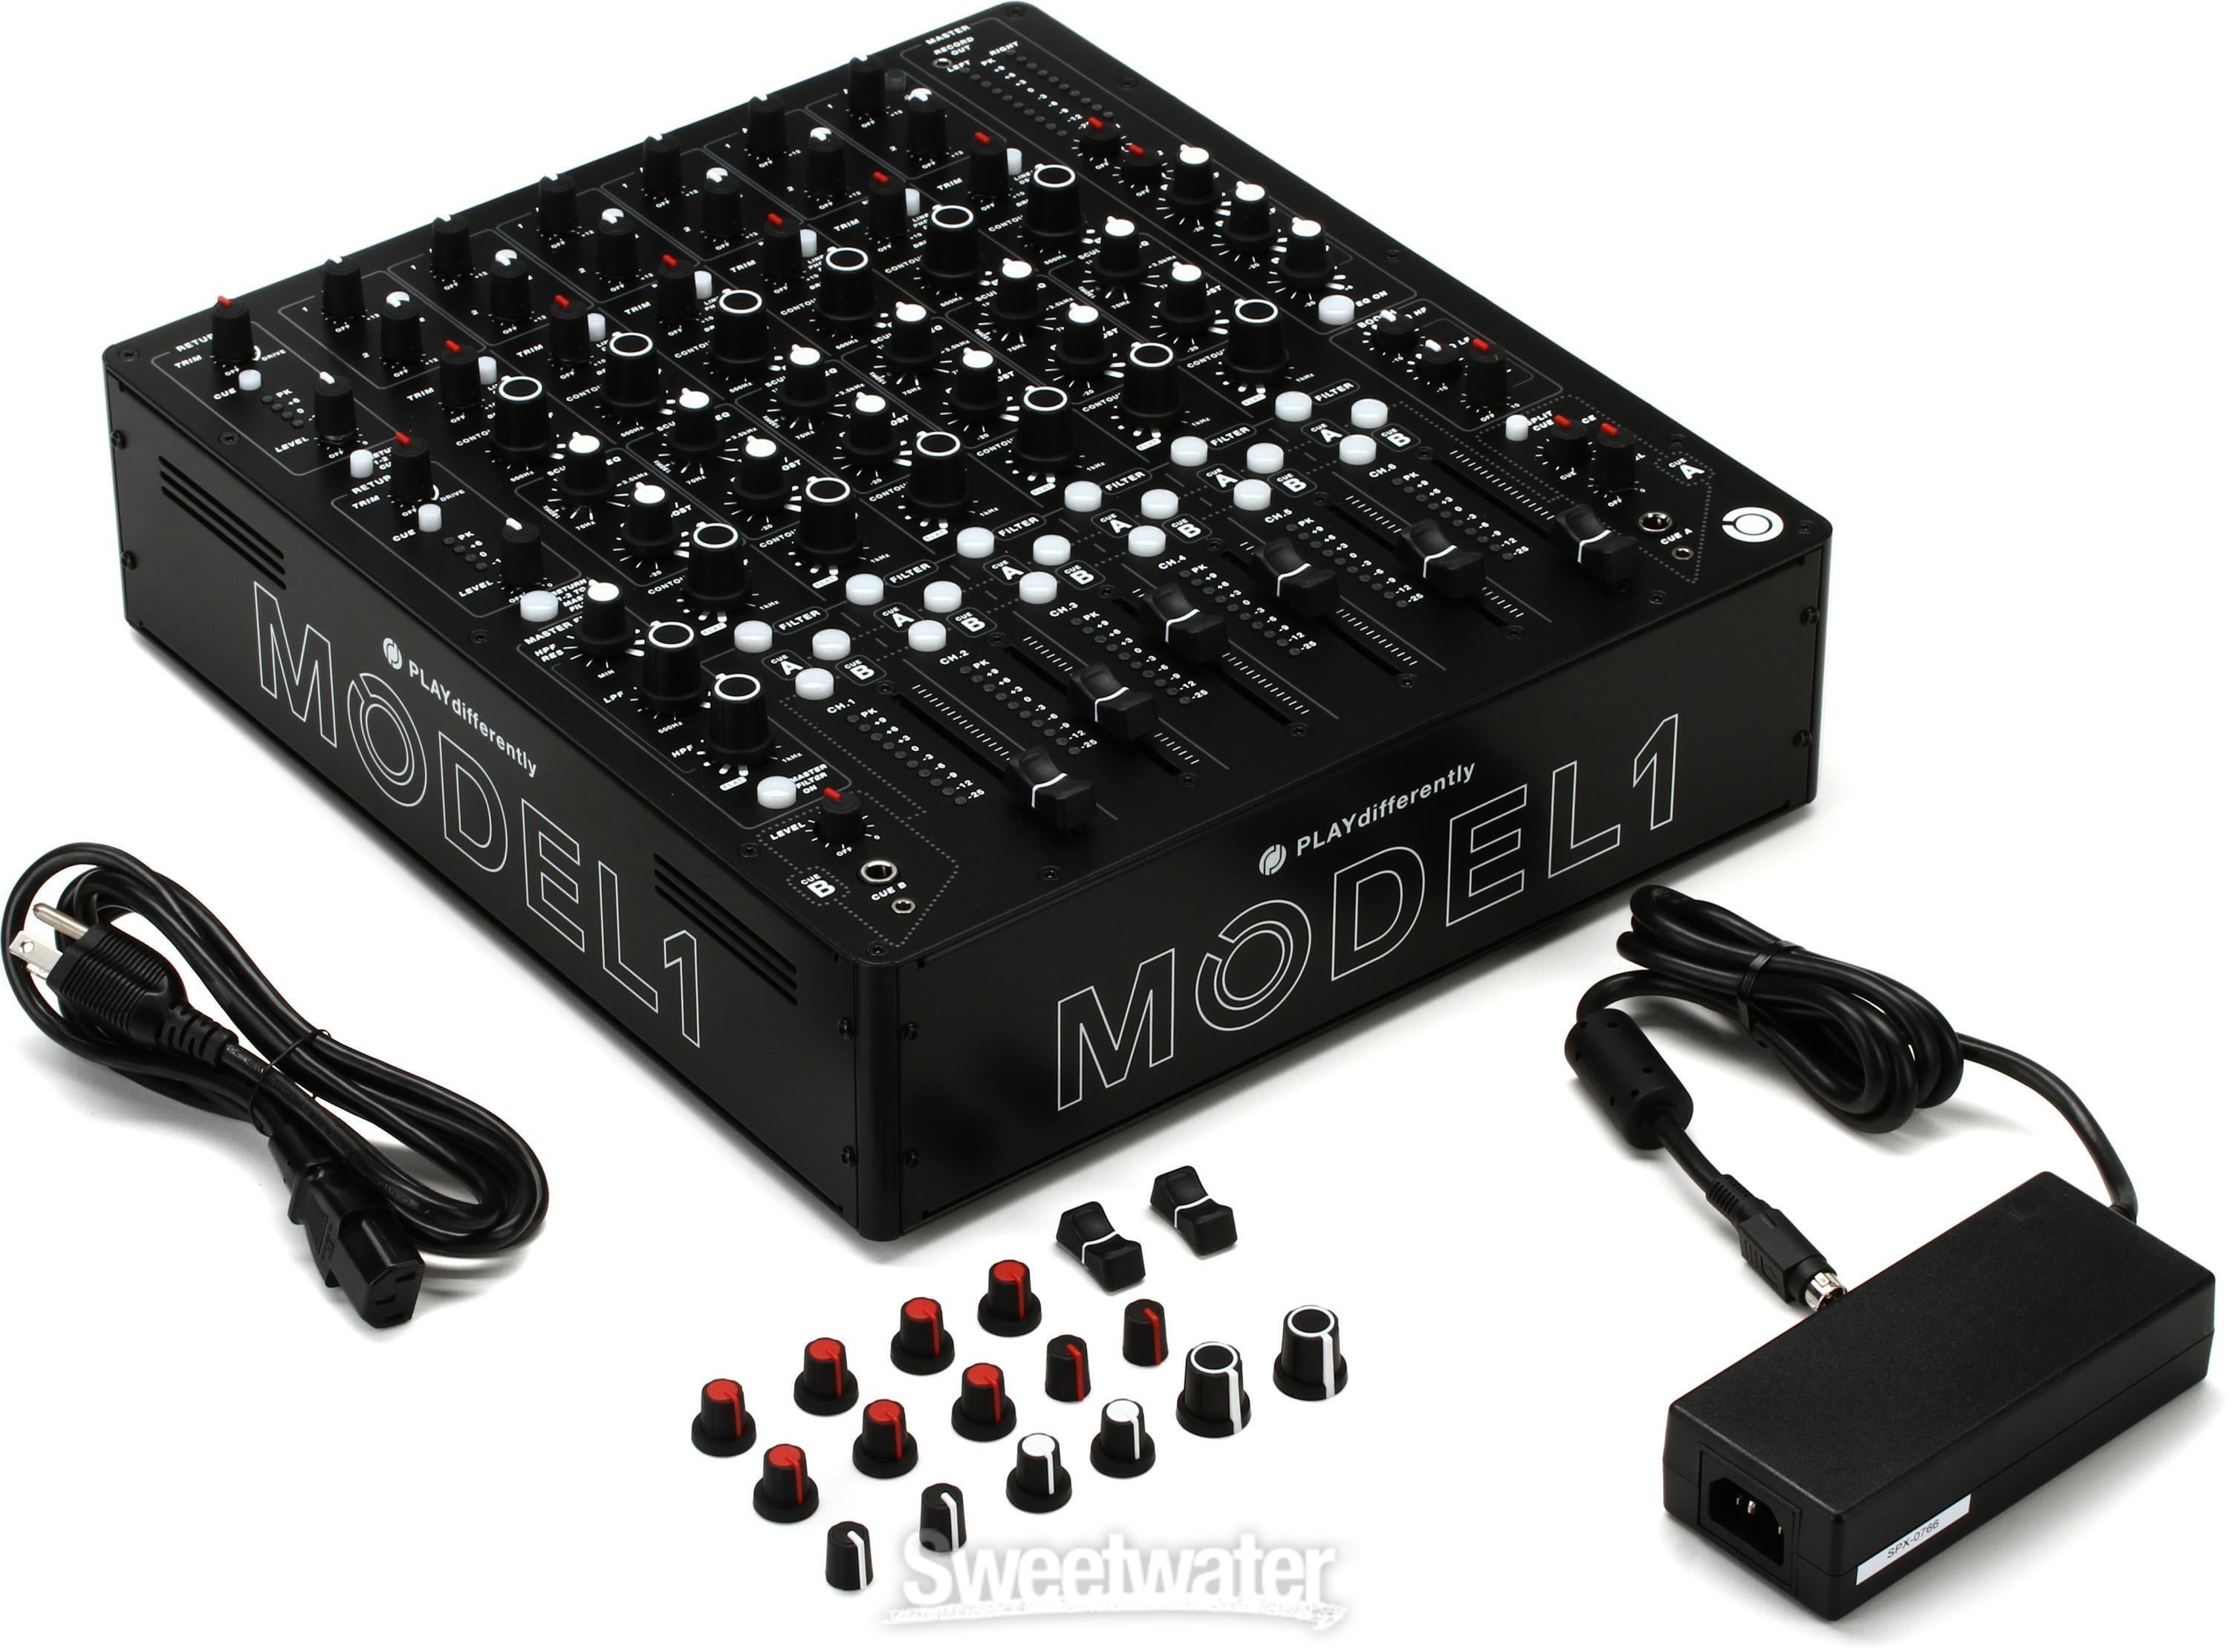 PLAYdifferently Model 1 6-Channel DJ Mixer | Sweetwater